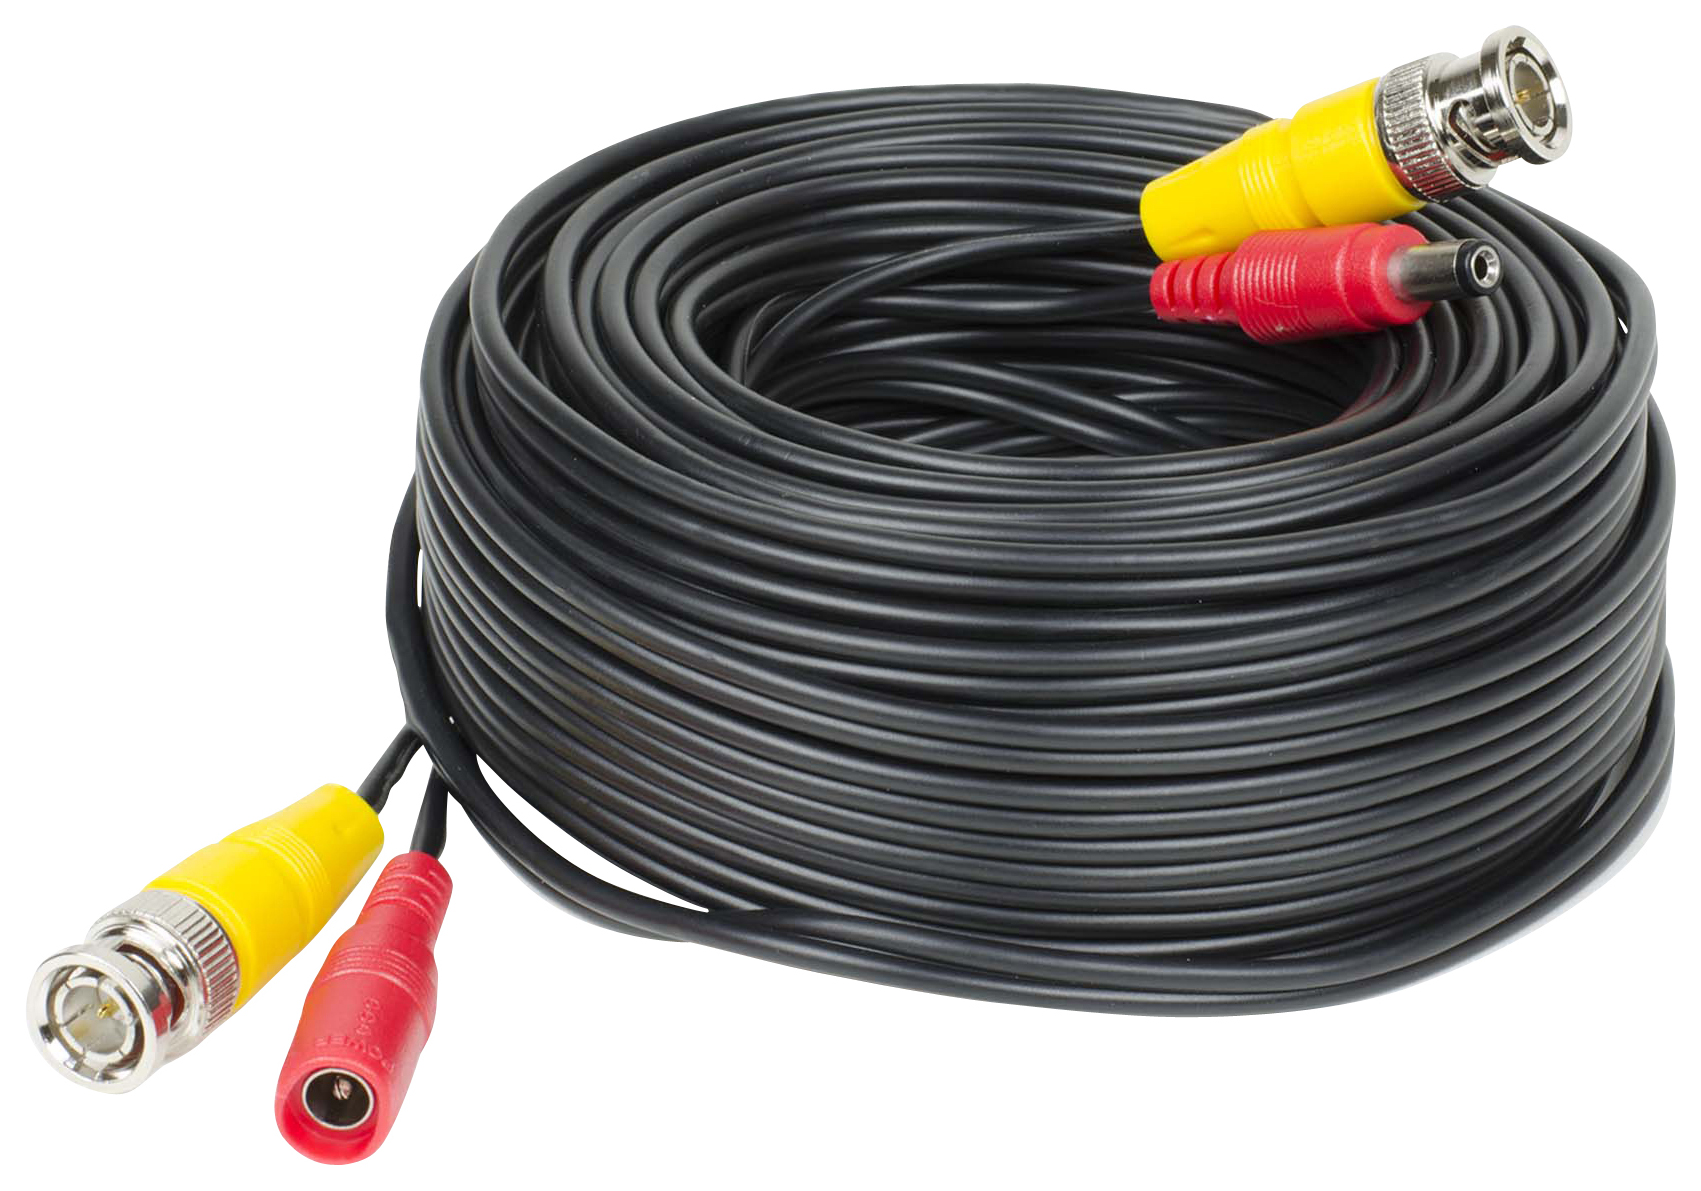 Image of Yale Smart Home CCTV Cable - 30M